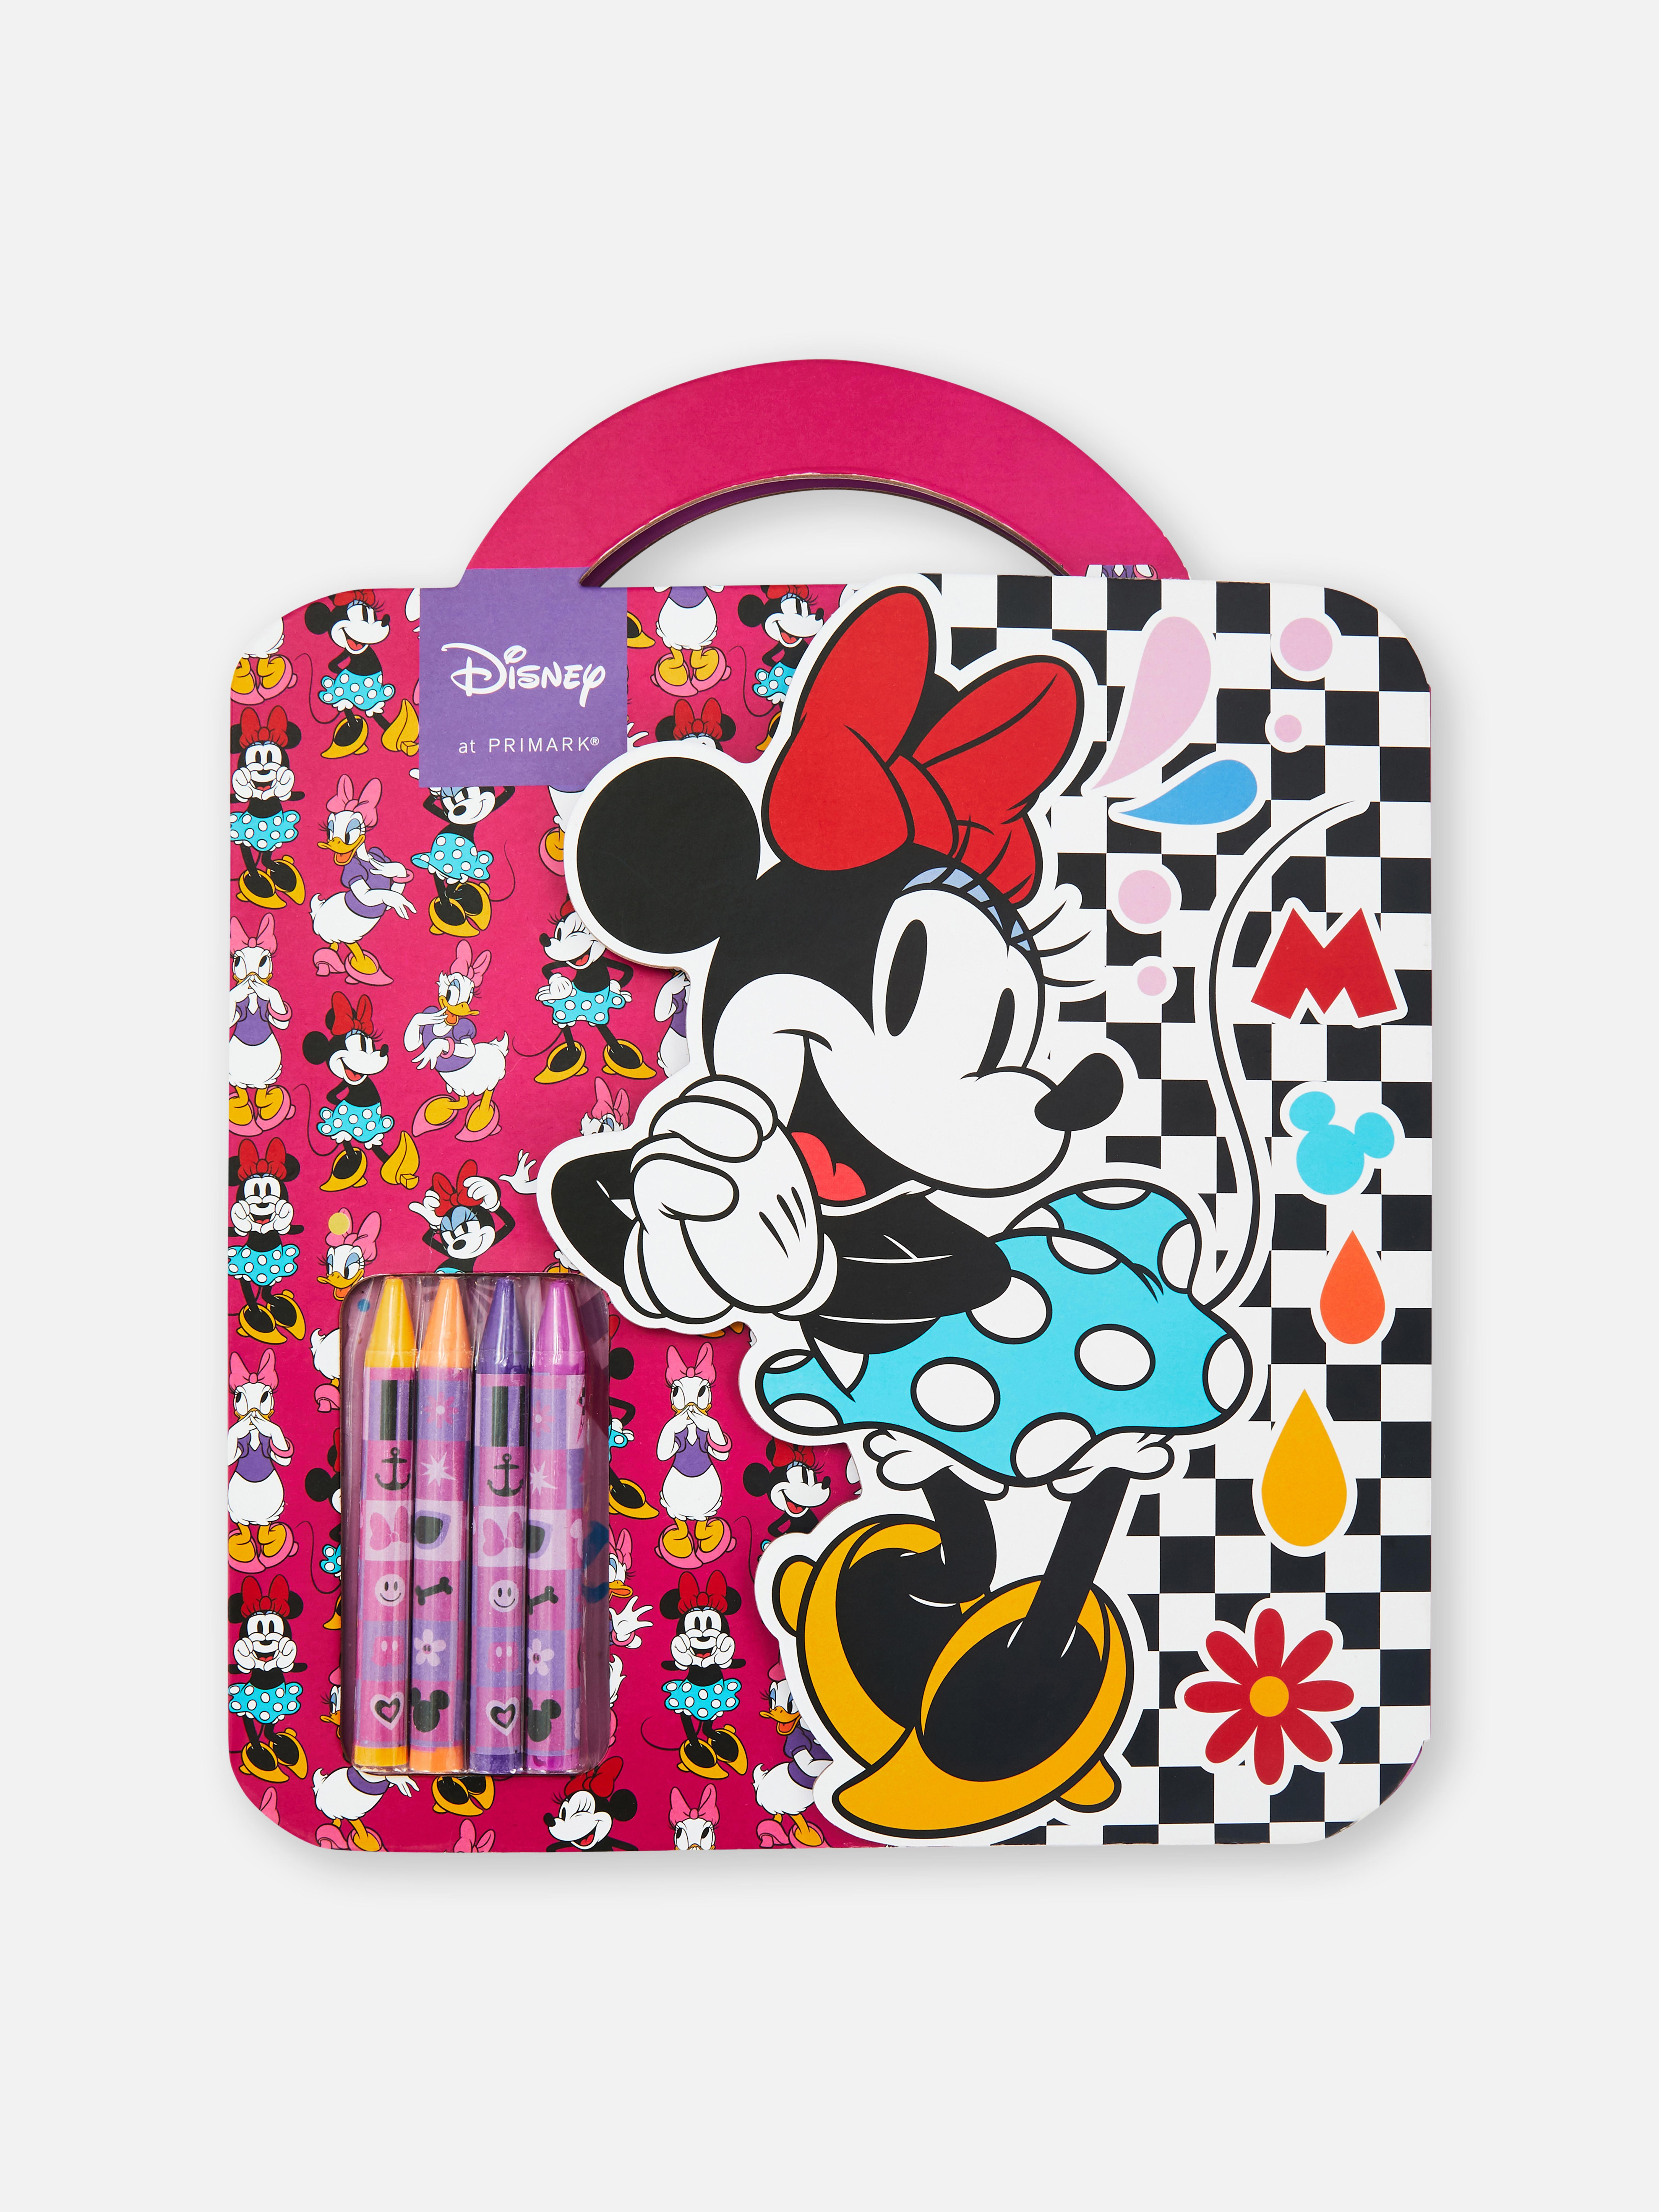 Disney's Minnie Mouse Carry Along Colouring Set   Primark